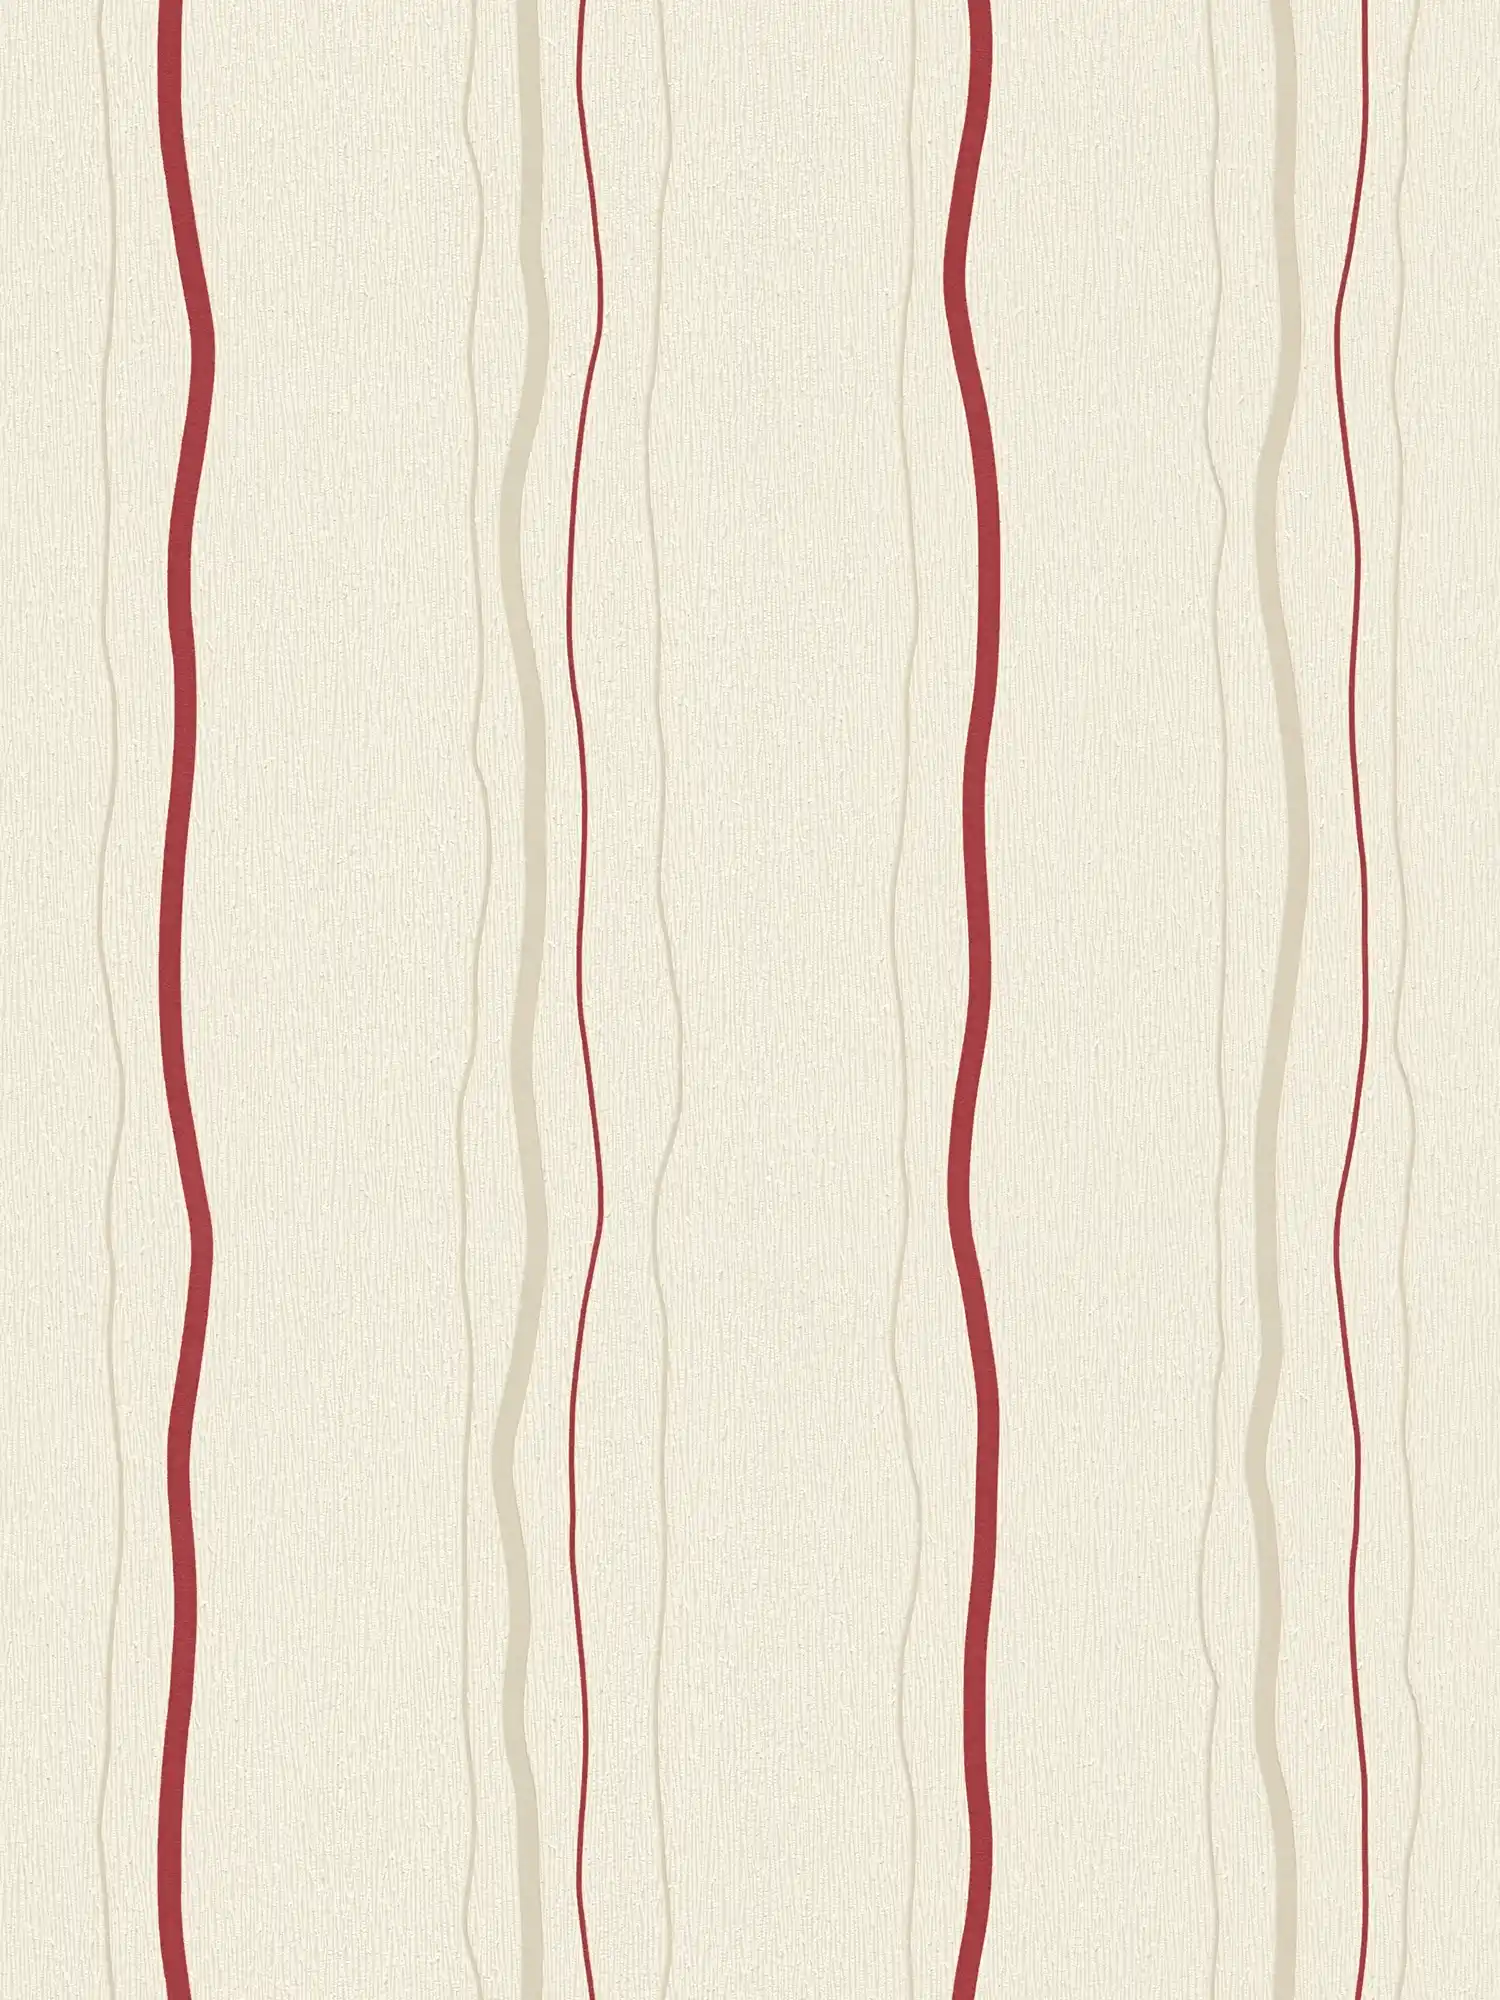 Wallpaper with line pattern vertical stripes - cream, red, beige
